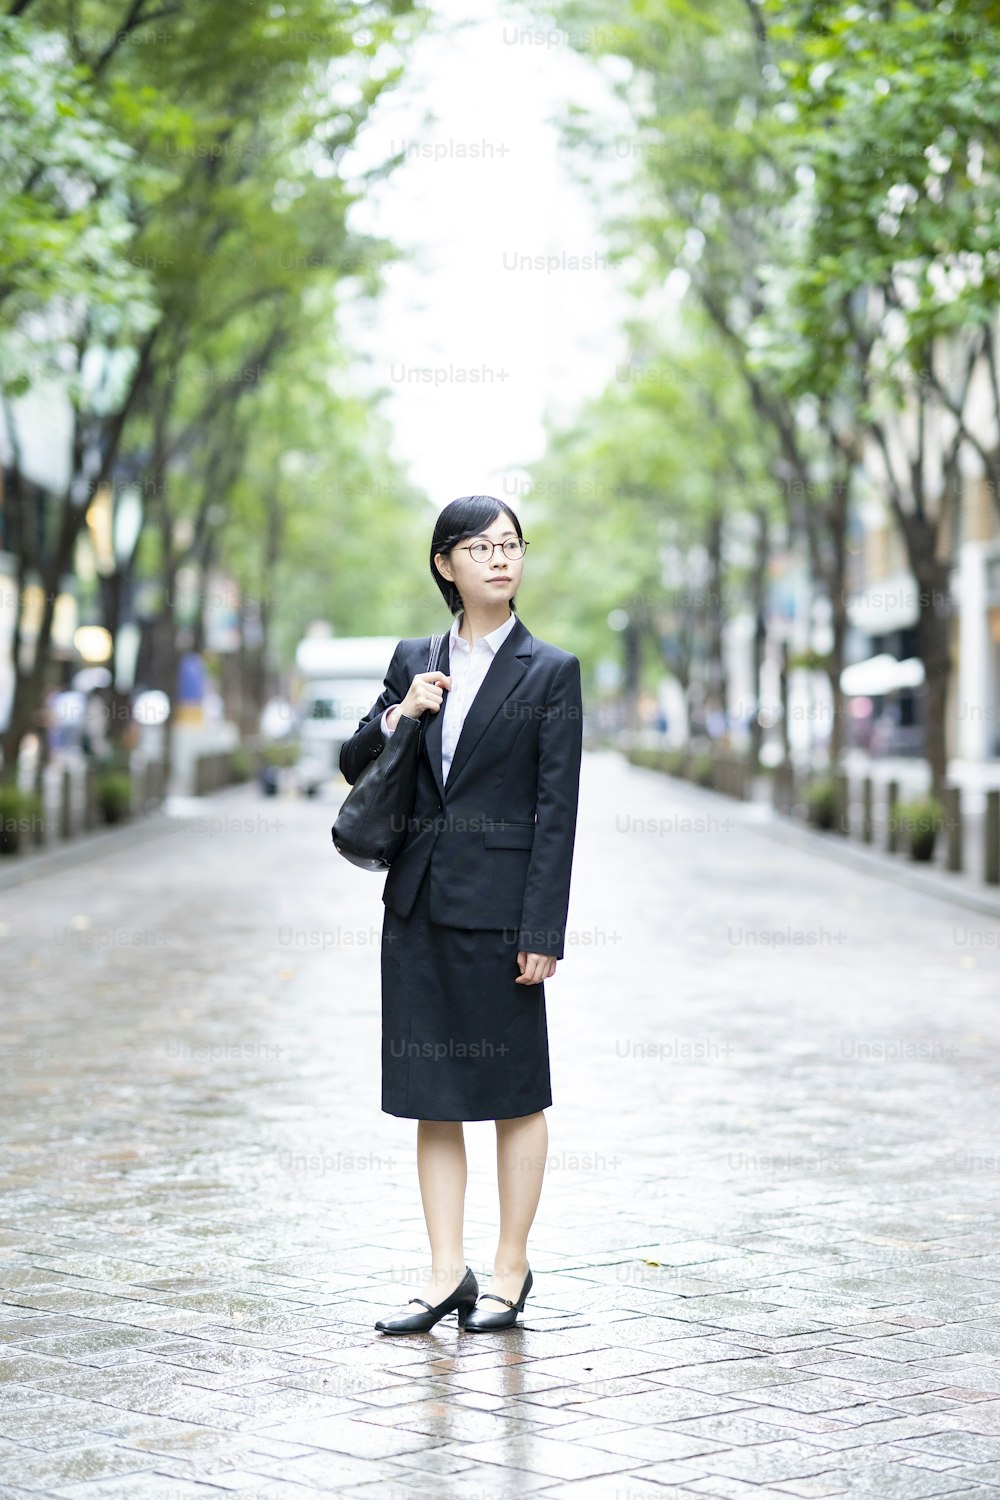 A young woman in a suit standing on a street lined with roadside trees